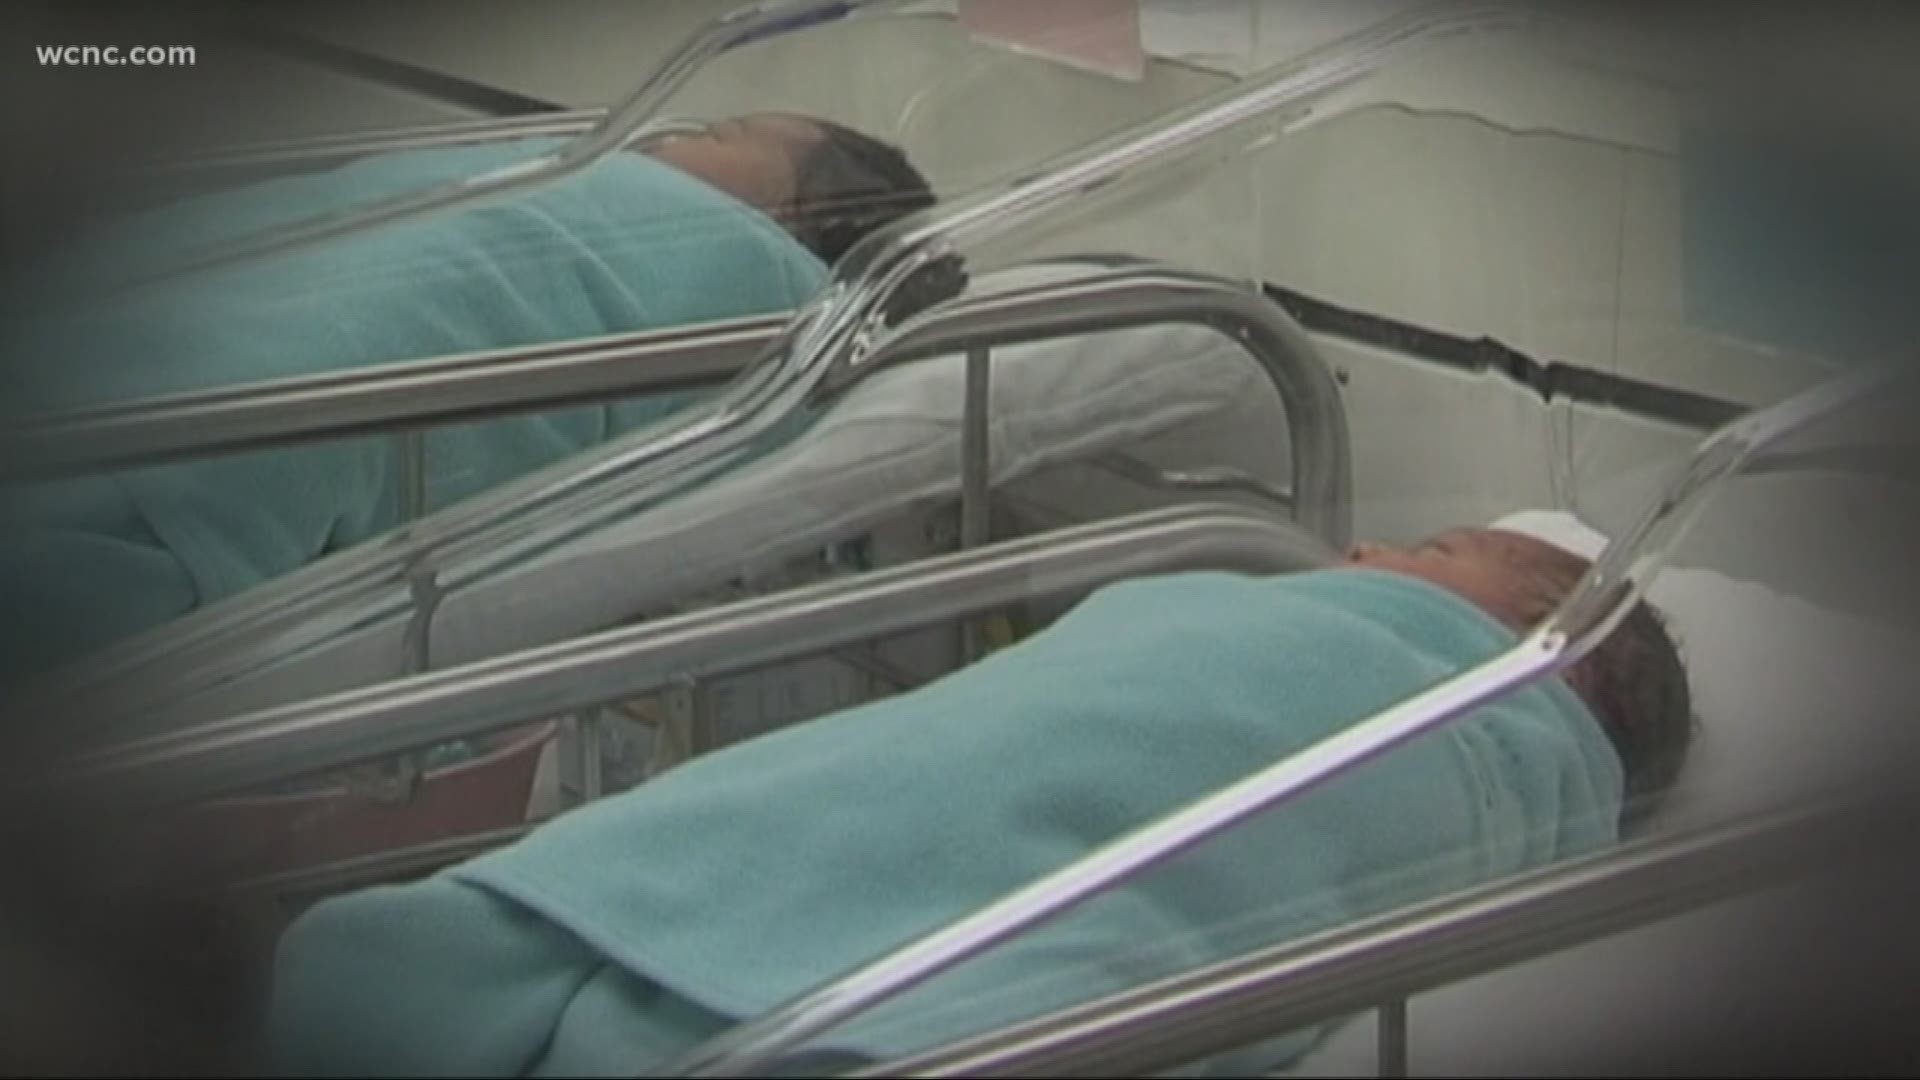 The state house was set to vote on the so-called "born alive" bill that would mean jail time for doctors who didn't care for an infant born after a botched abortion.